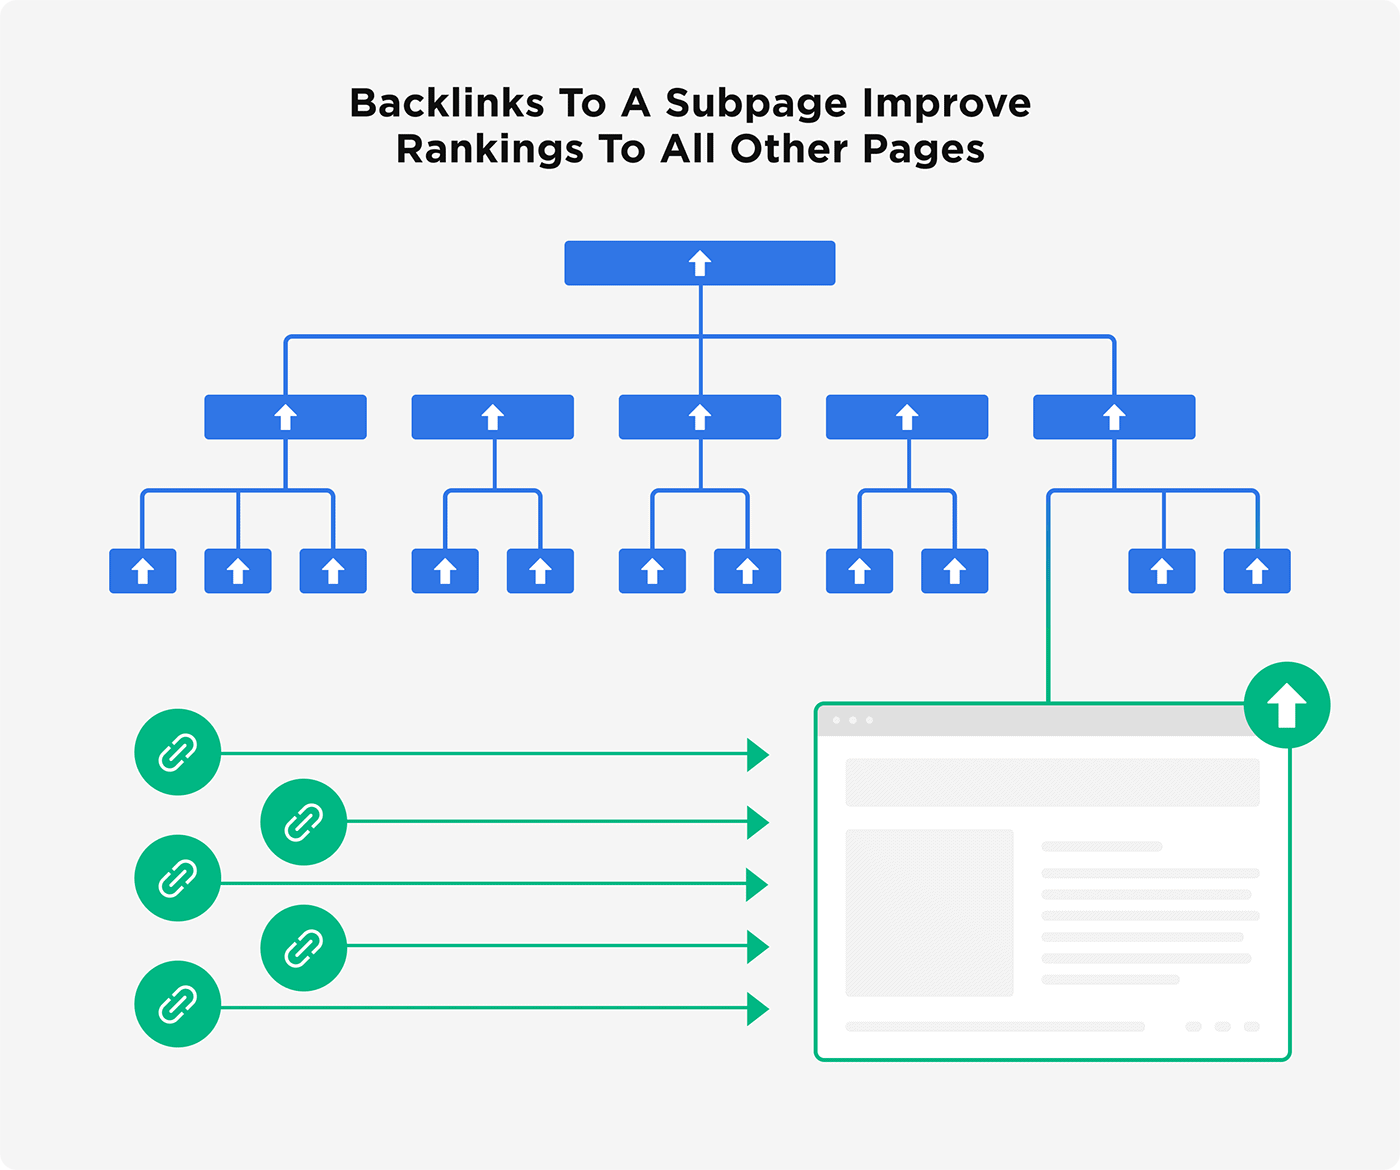 Backlinks to a subpage improve rankings to all other pages